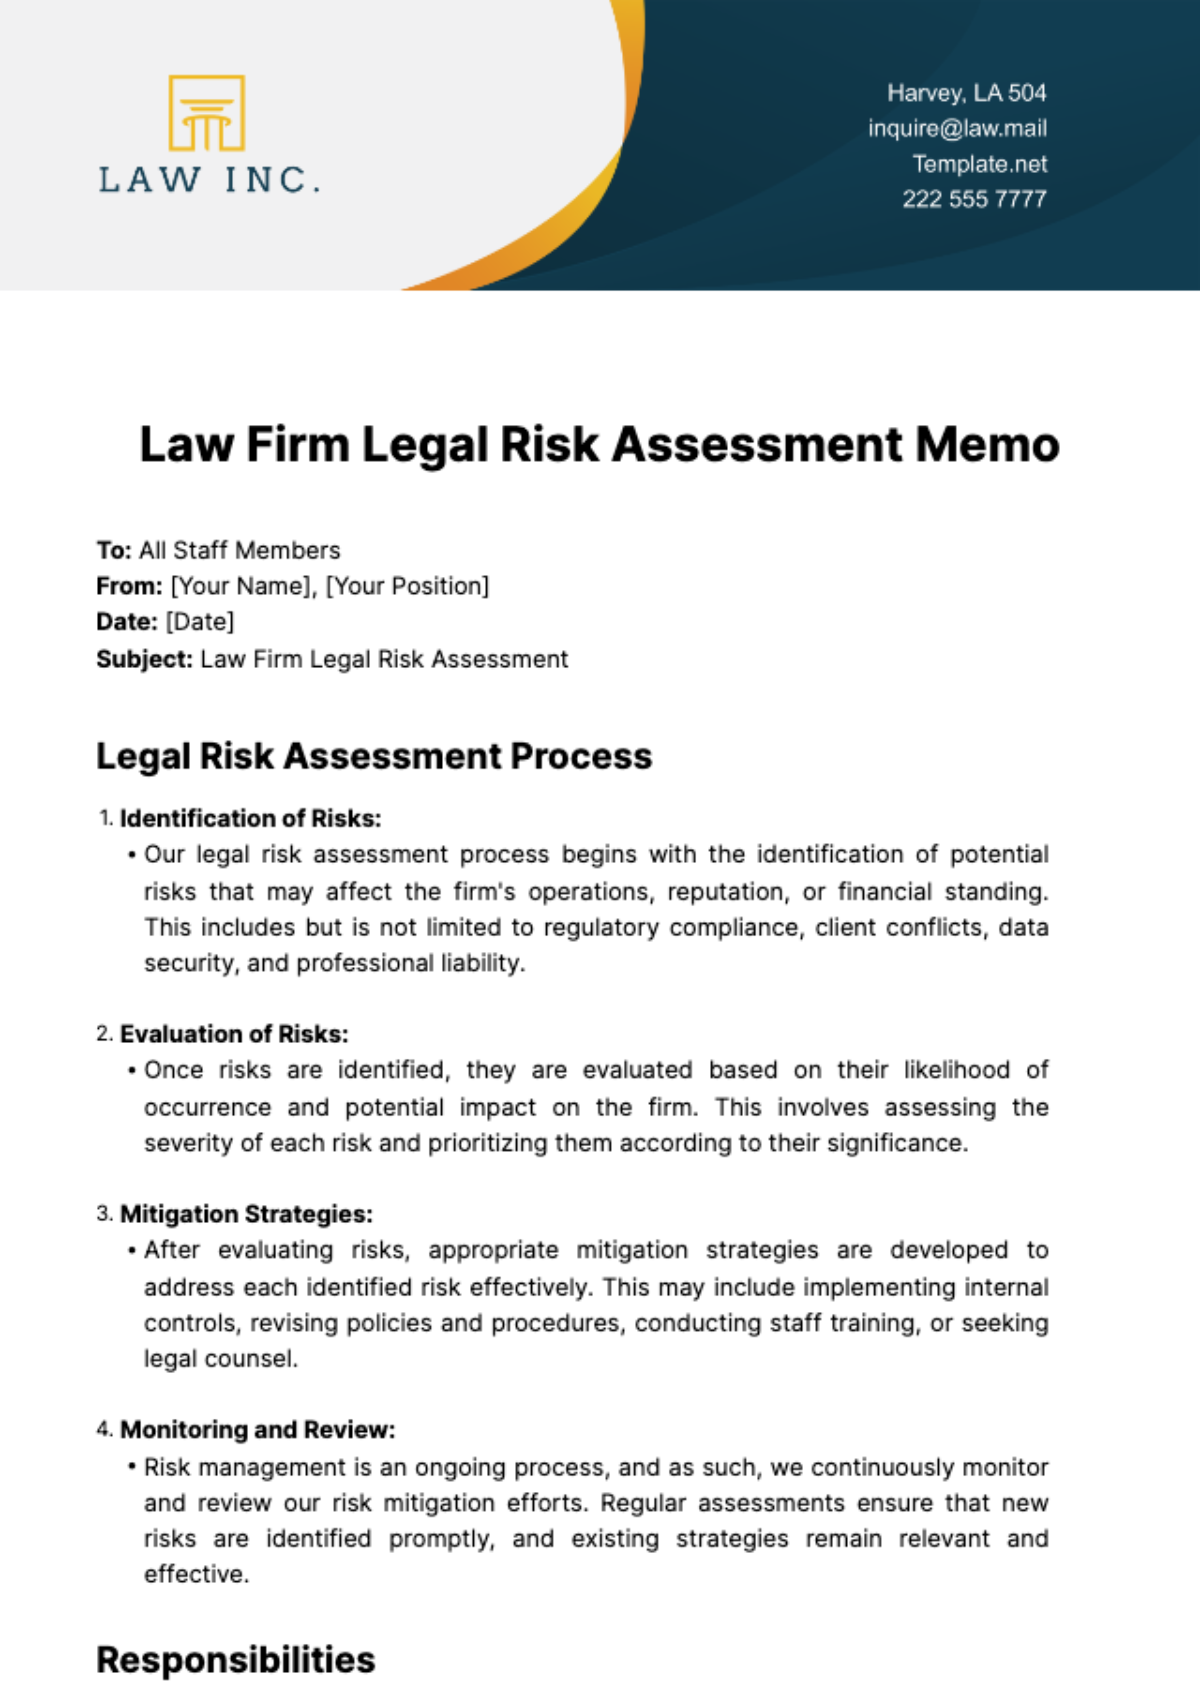 Free Law Firm Legal Risk Assessment Memo Template